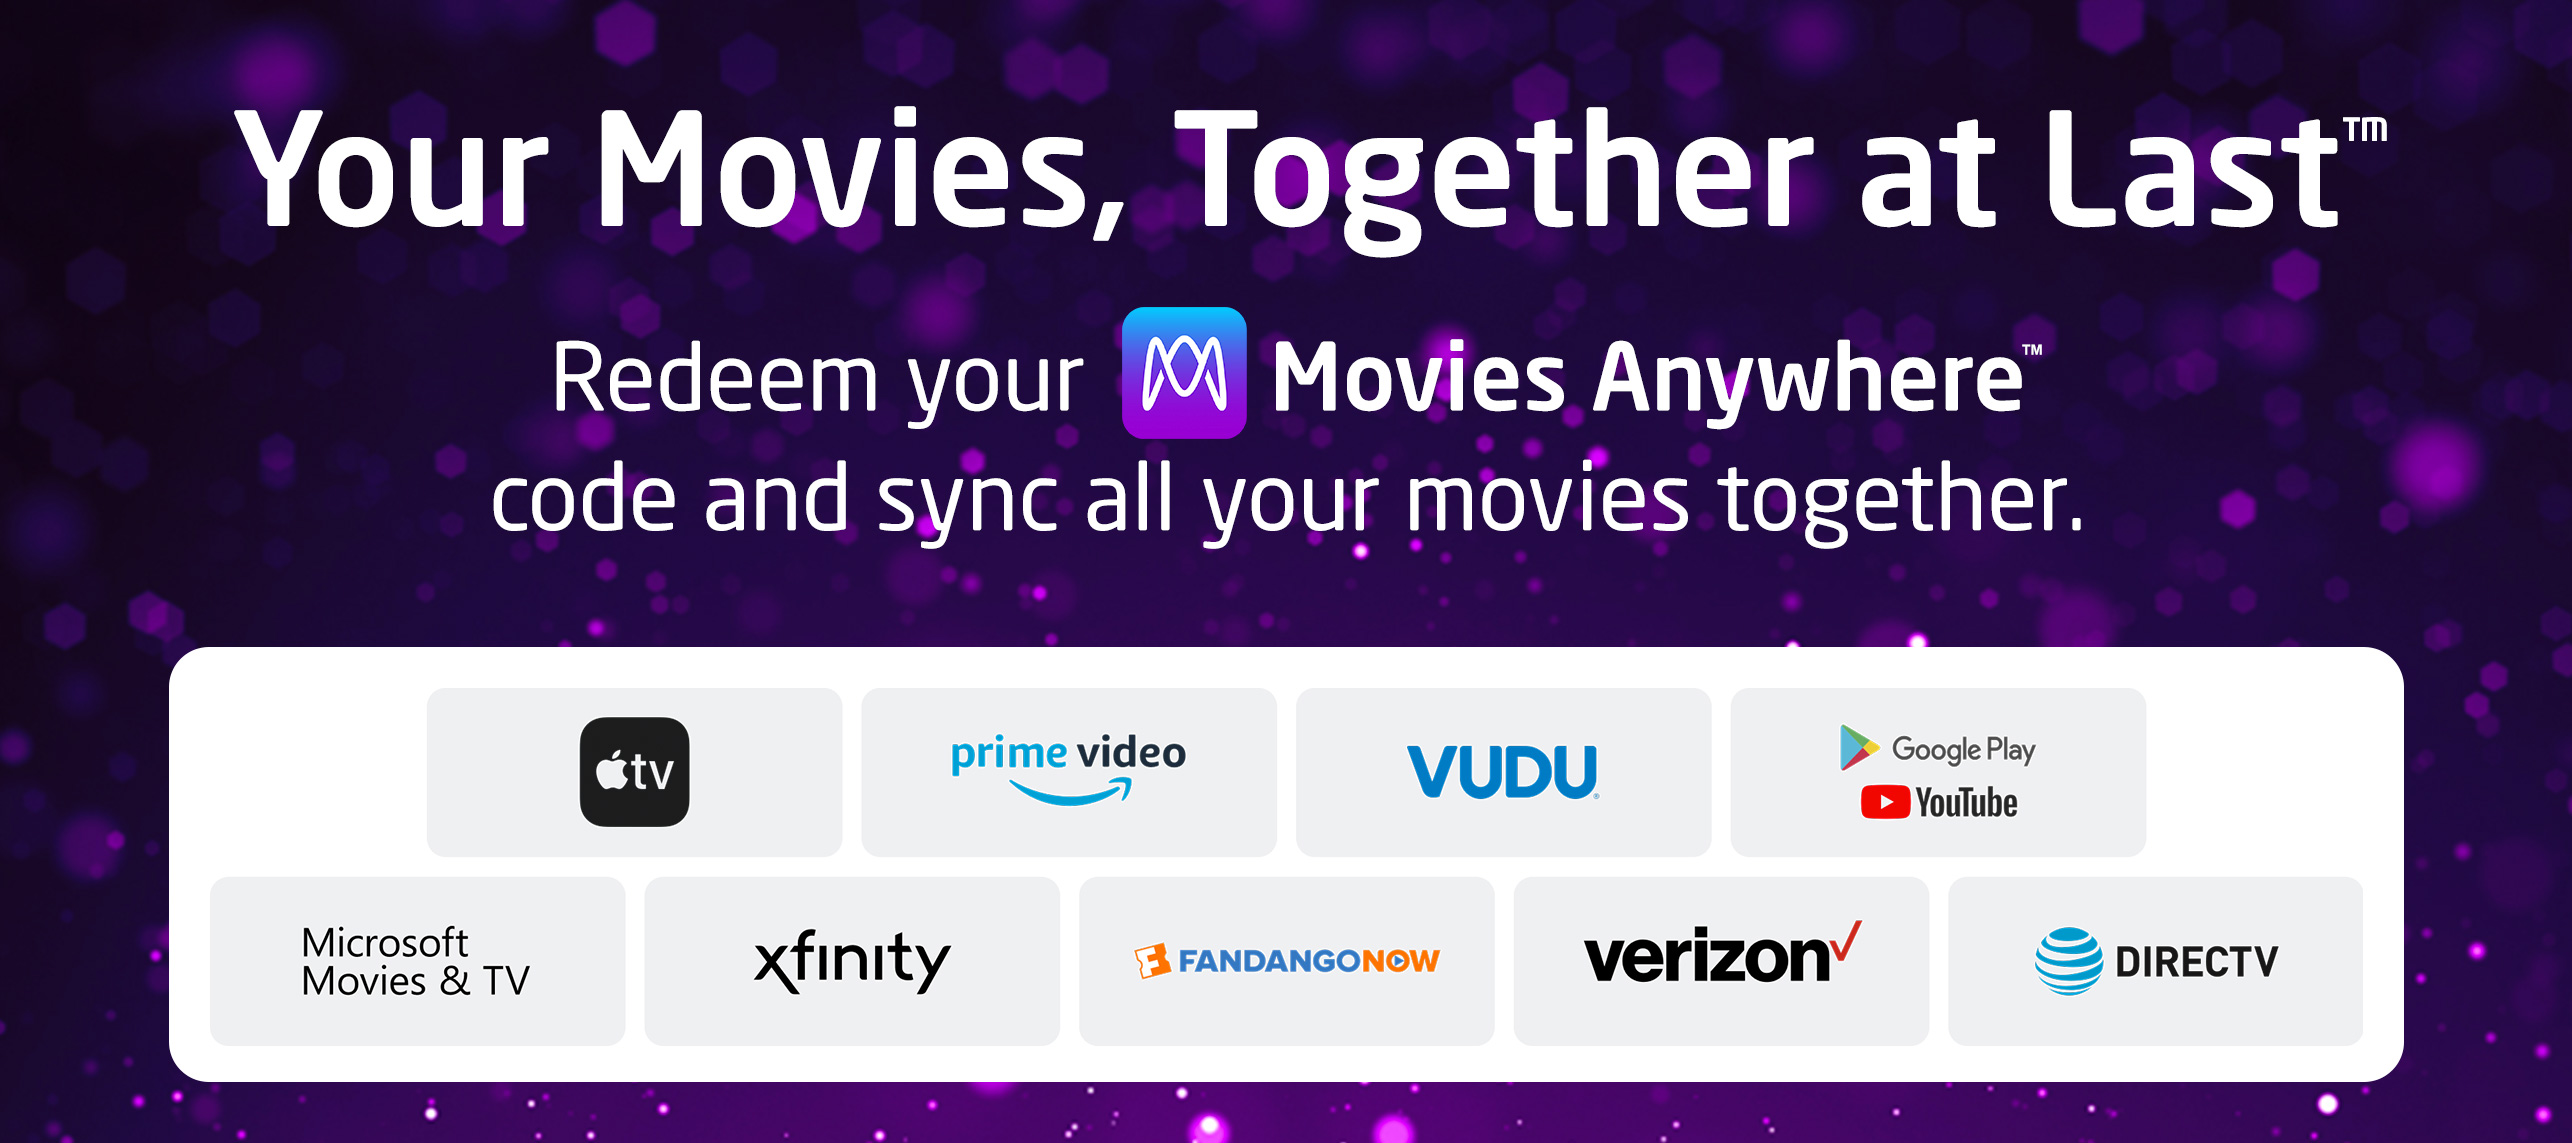 Movies Anywhere, Your Movies Together at Last